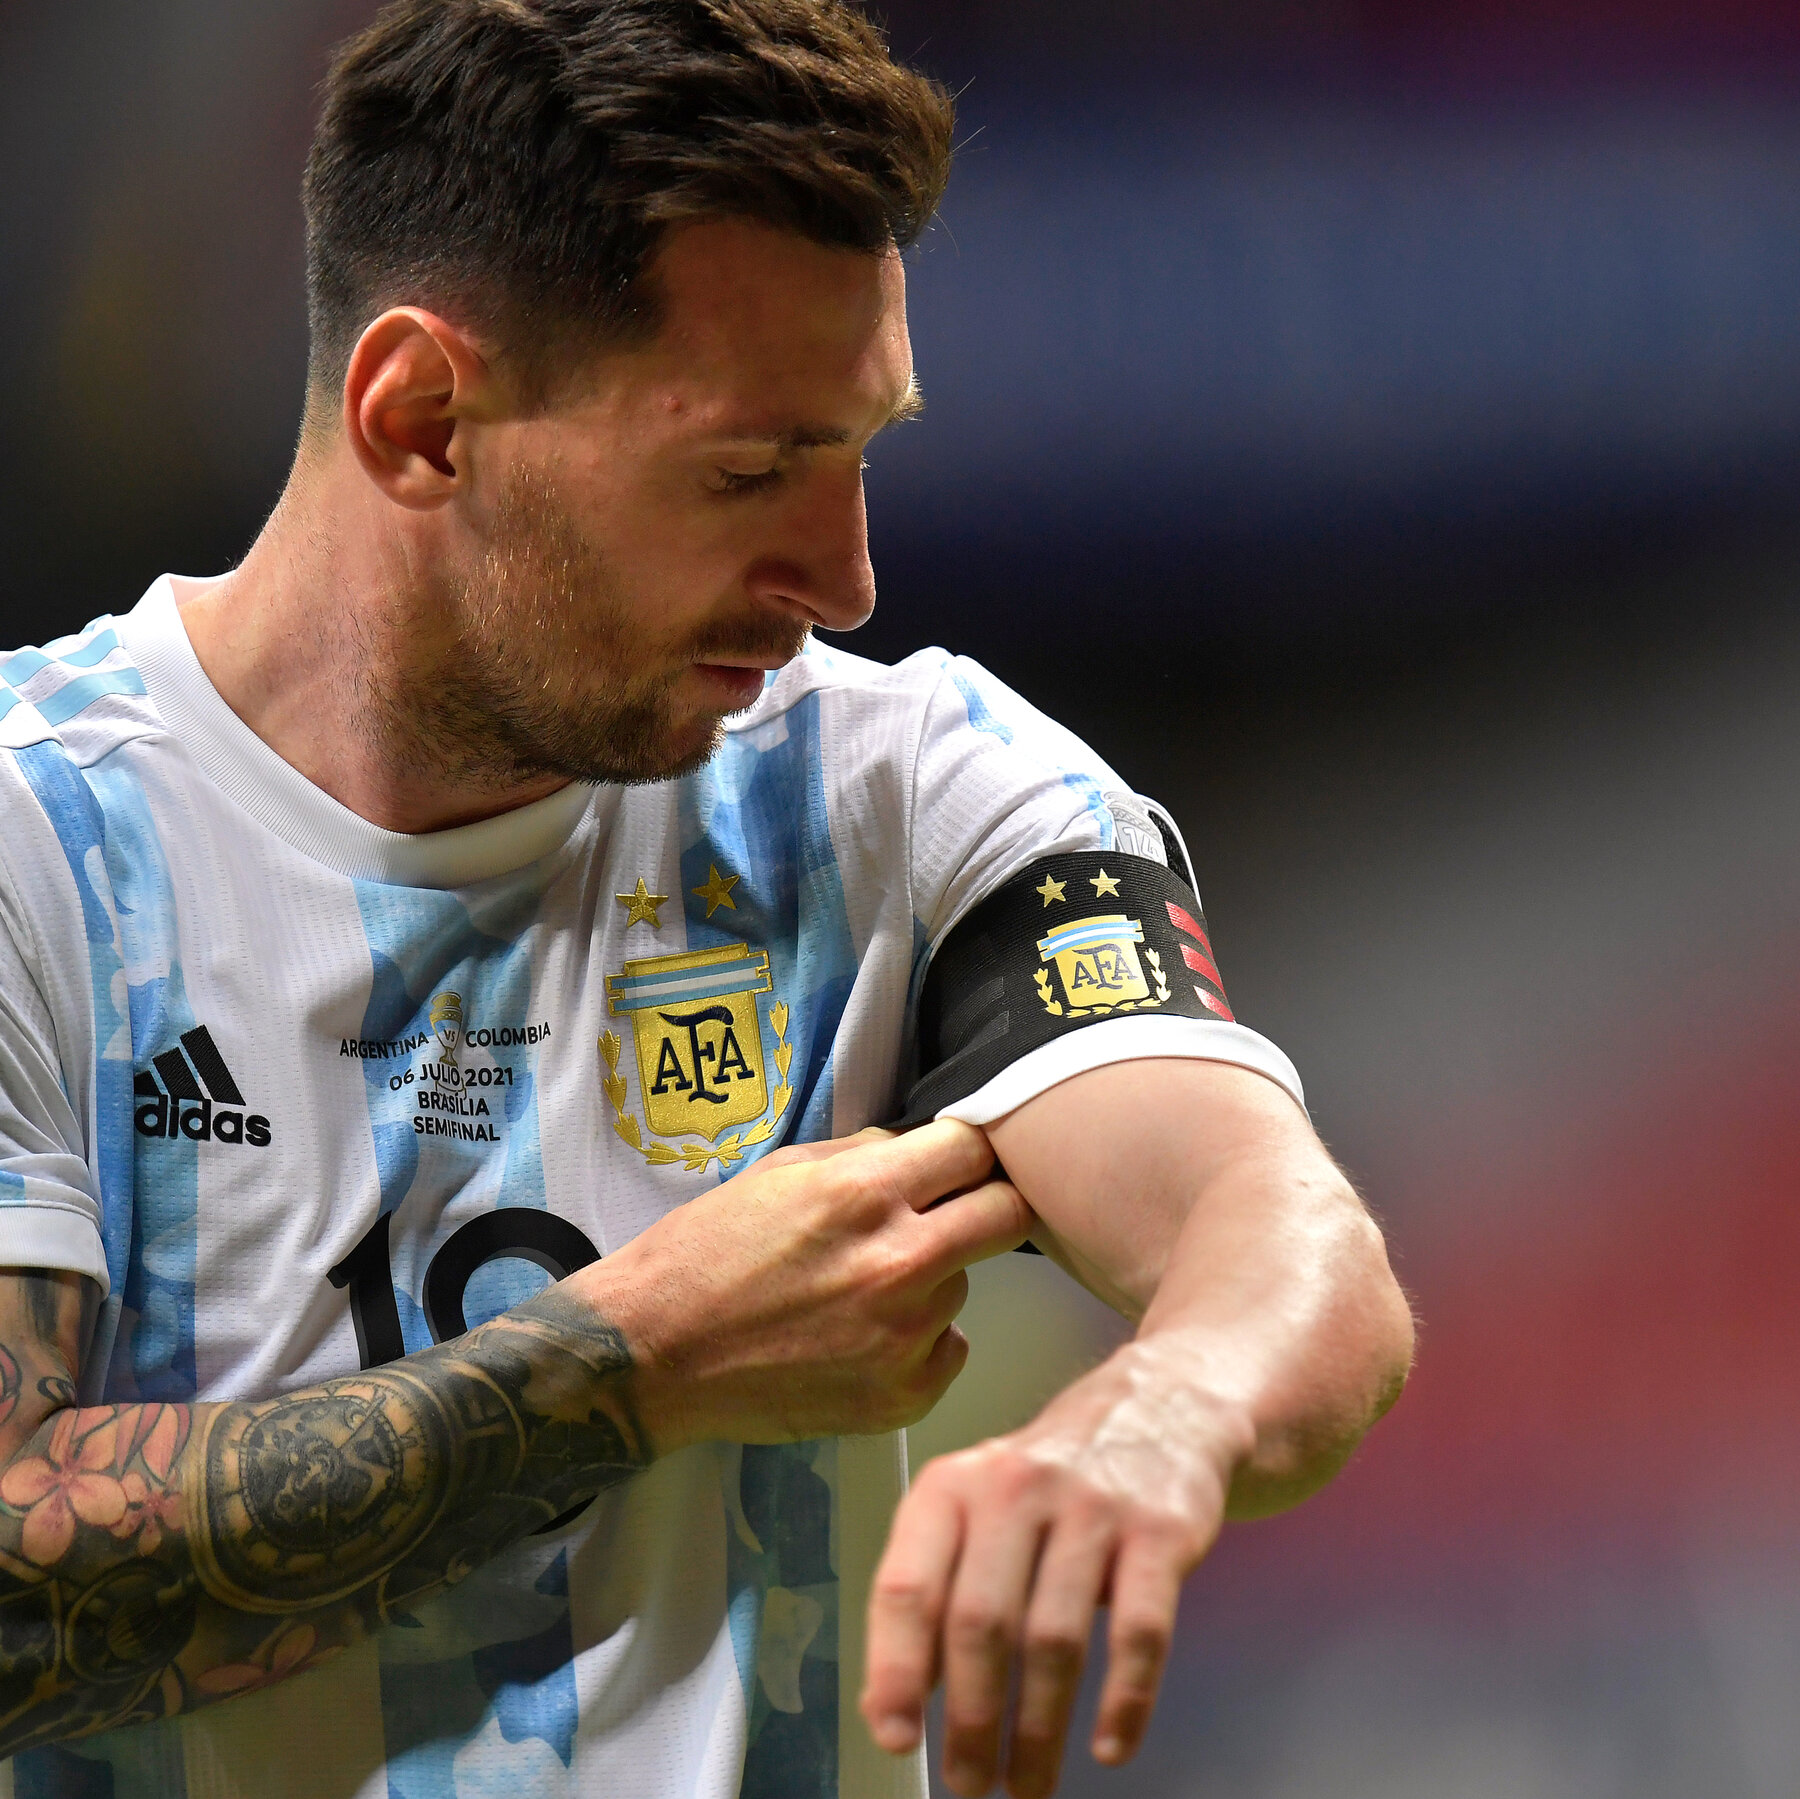 Lionel Messi of Argentina claims this World Cup in 2022 will be his final one.